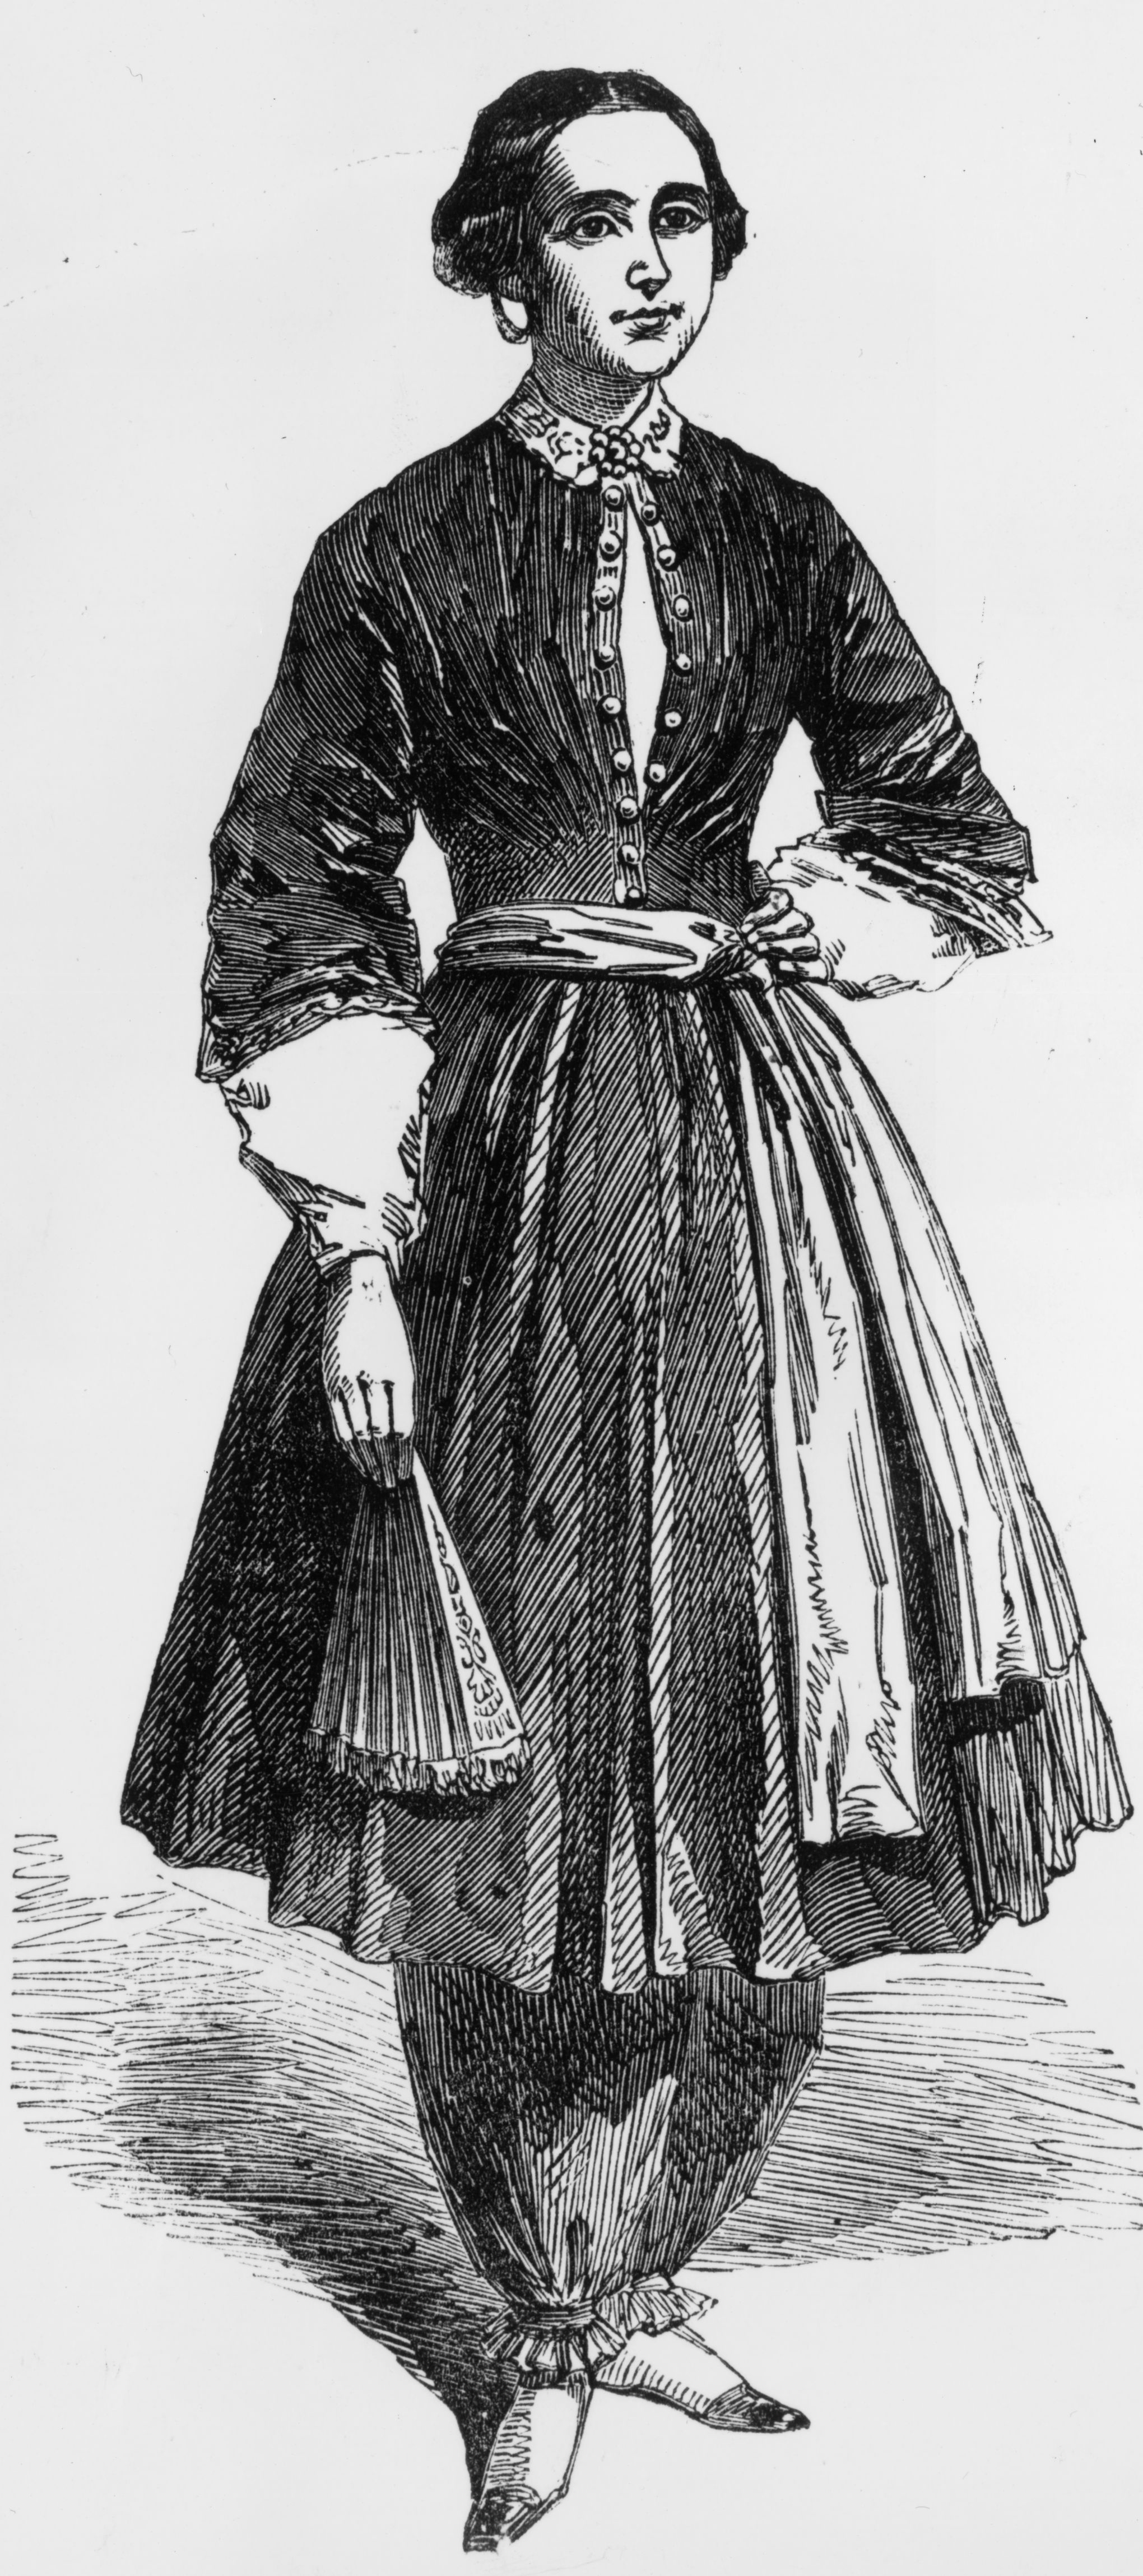 Amelia Bloomer, champion of women's rights and dress reform, wearing the 'trousers' she designed which were called 'bloomers', circa 1855.